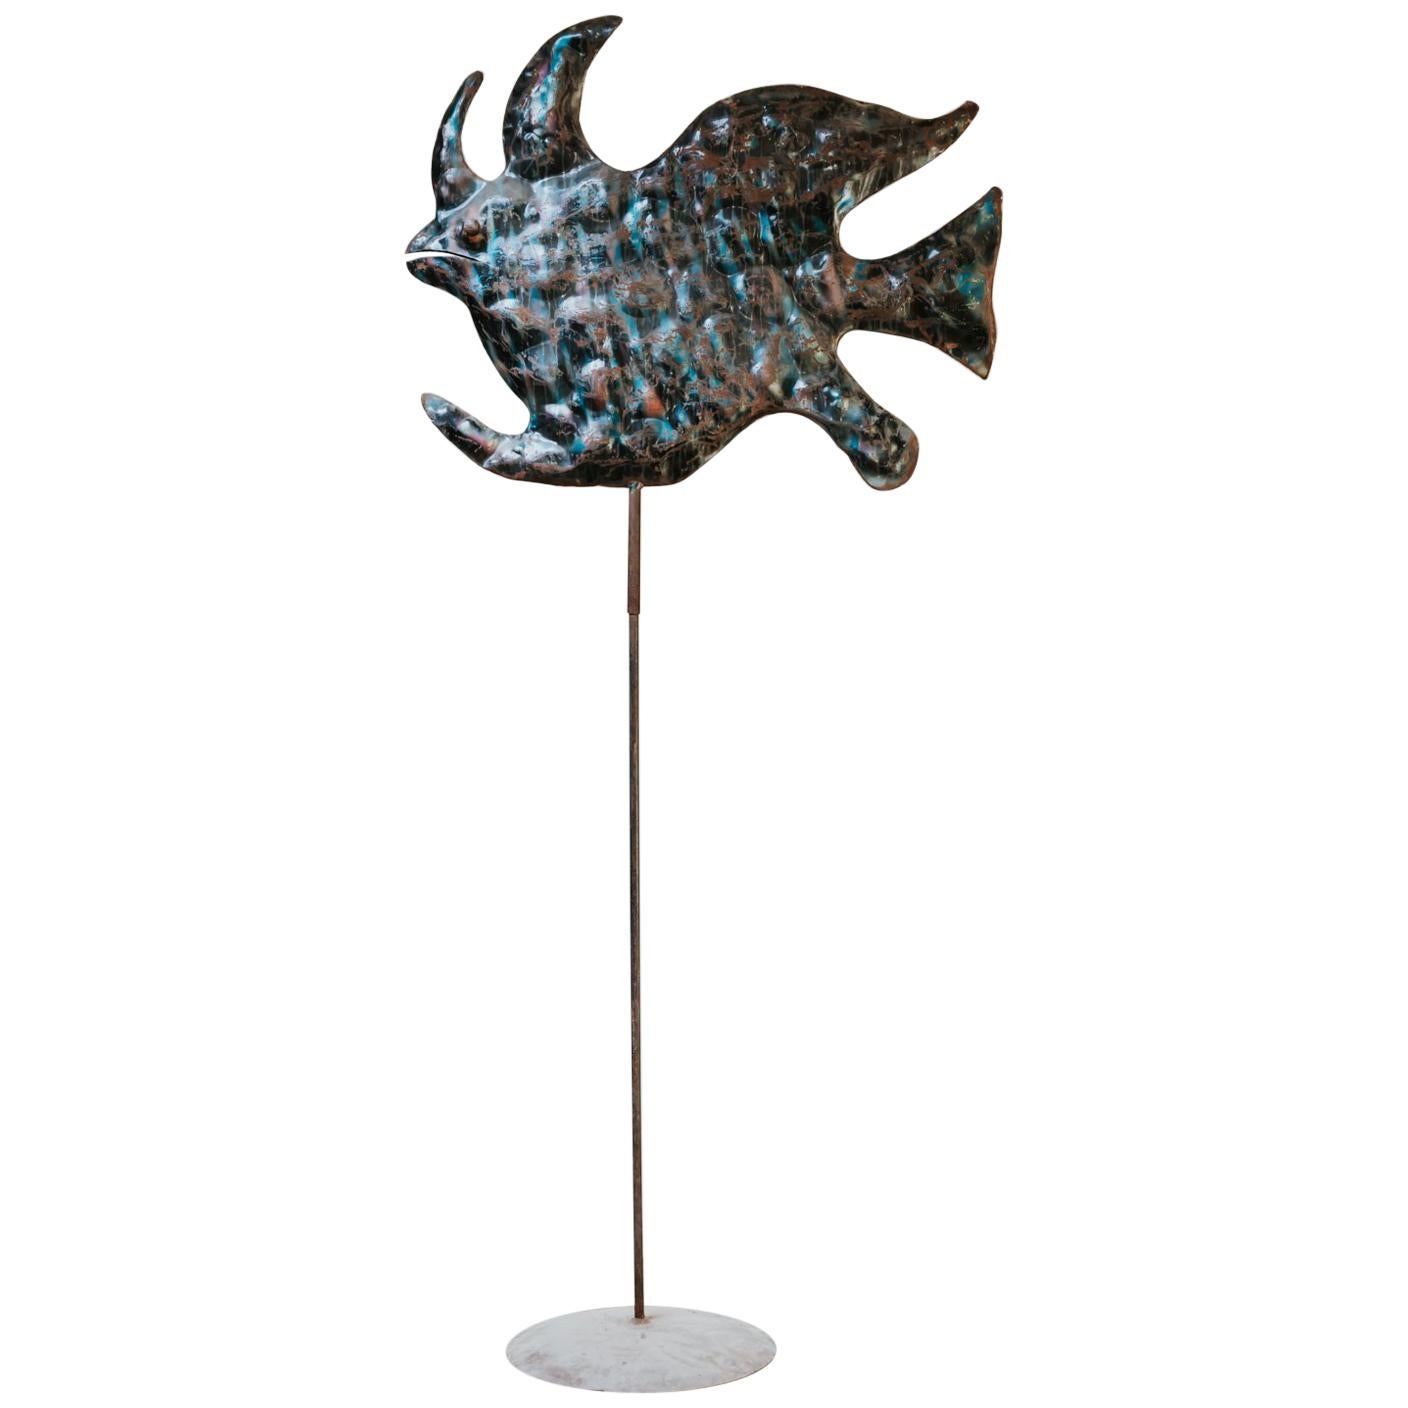 20th Century Iron Sculpture of a Fish For Sale at 1stDibs